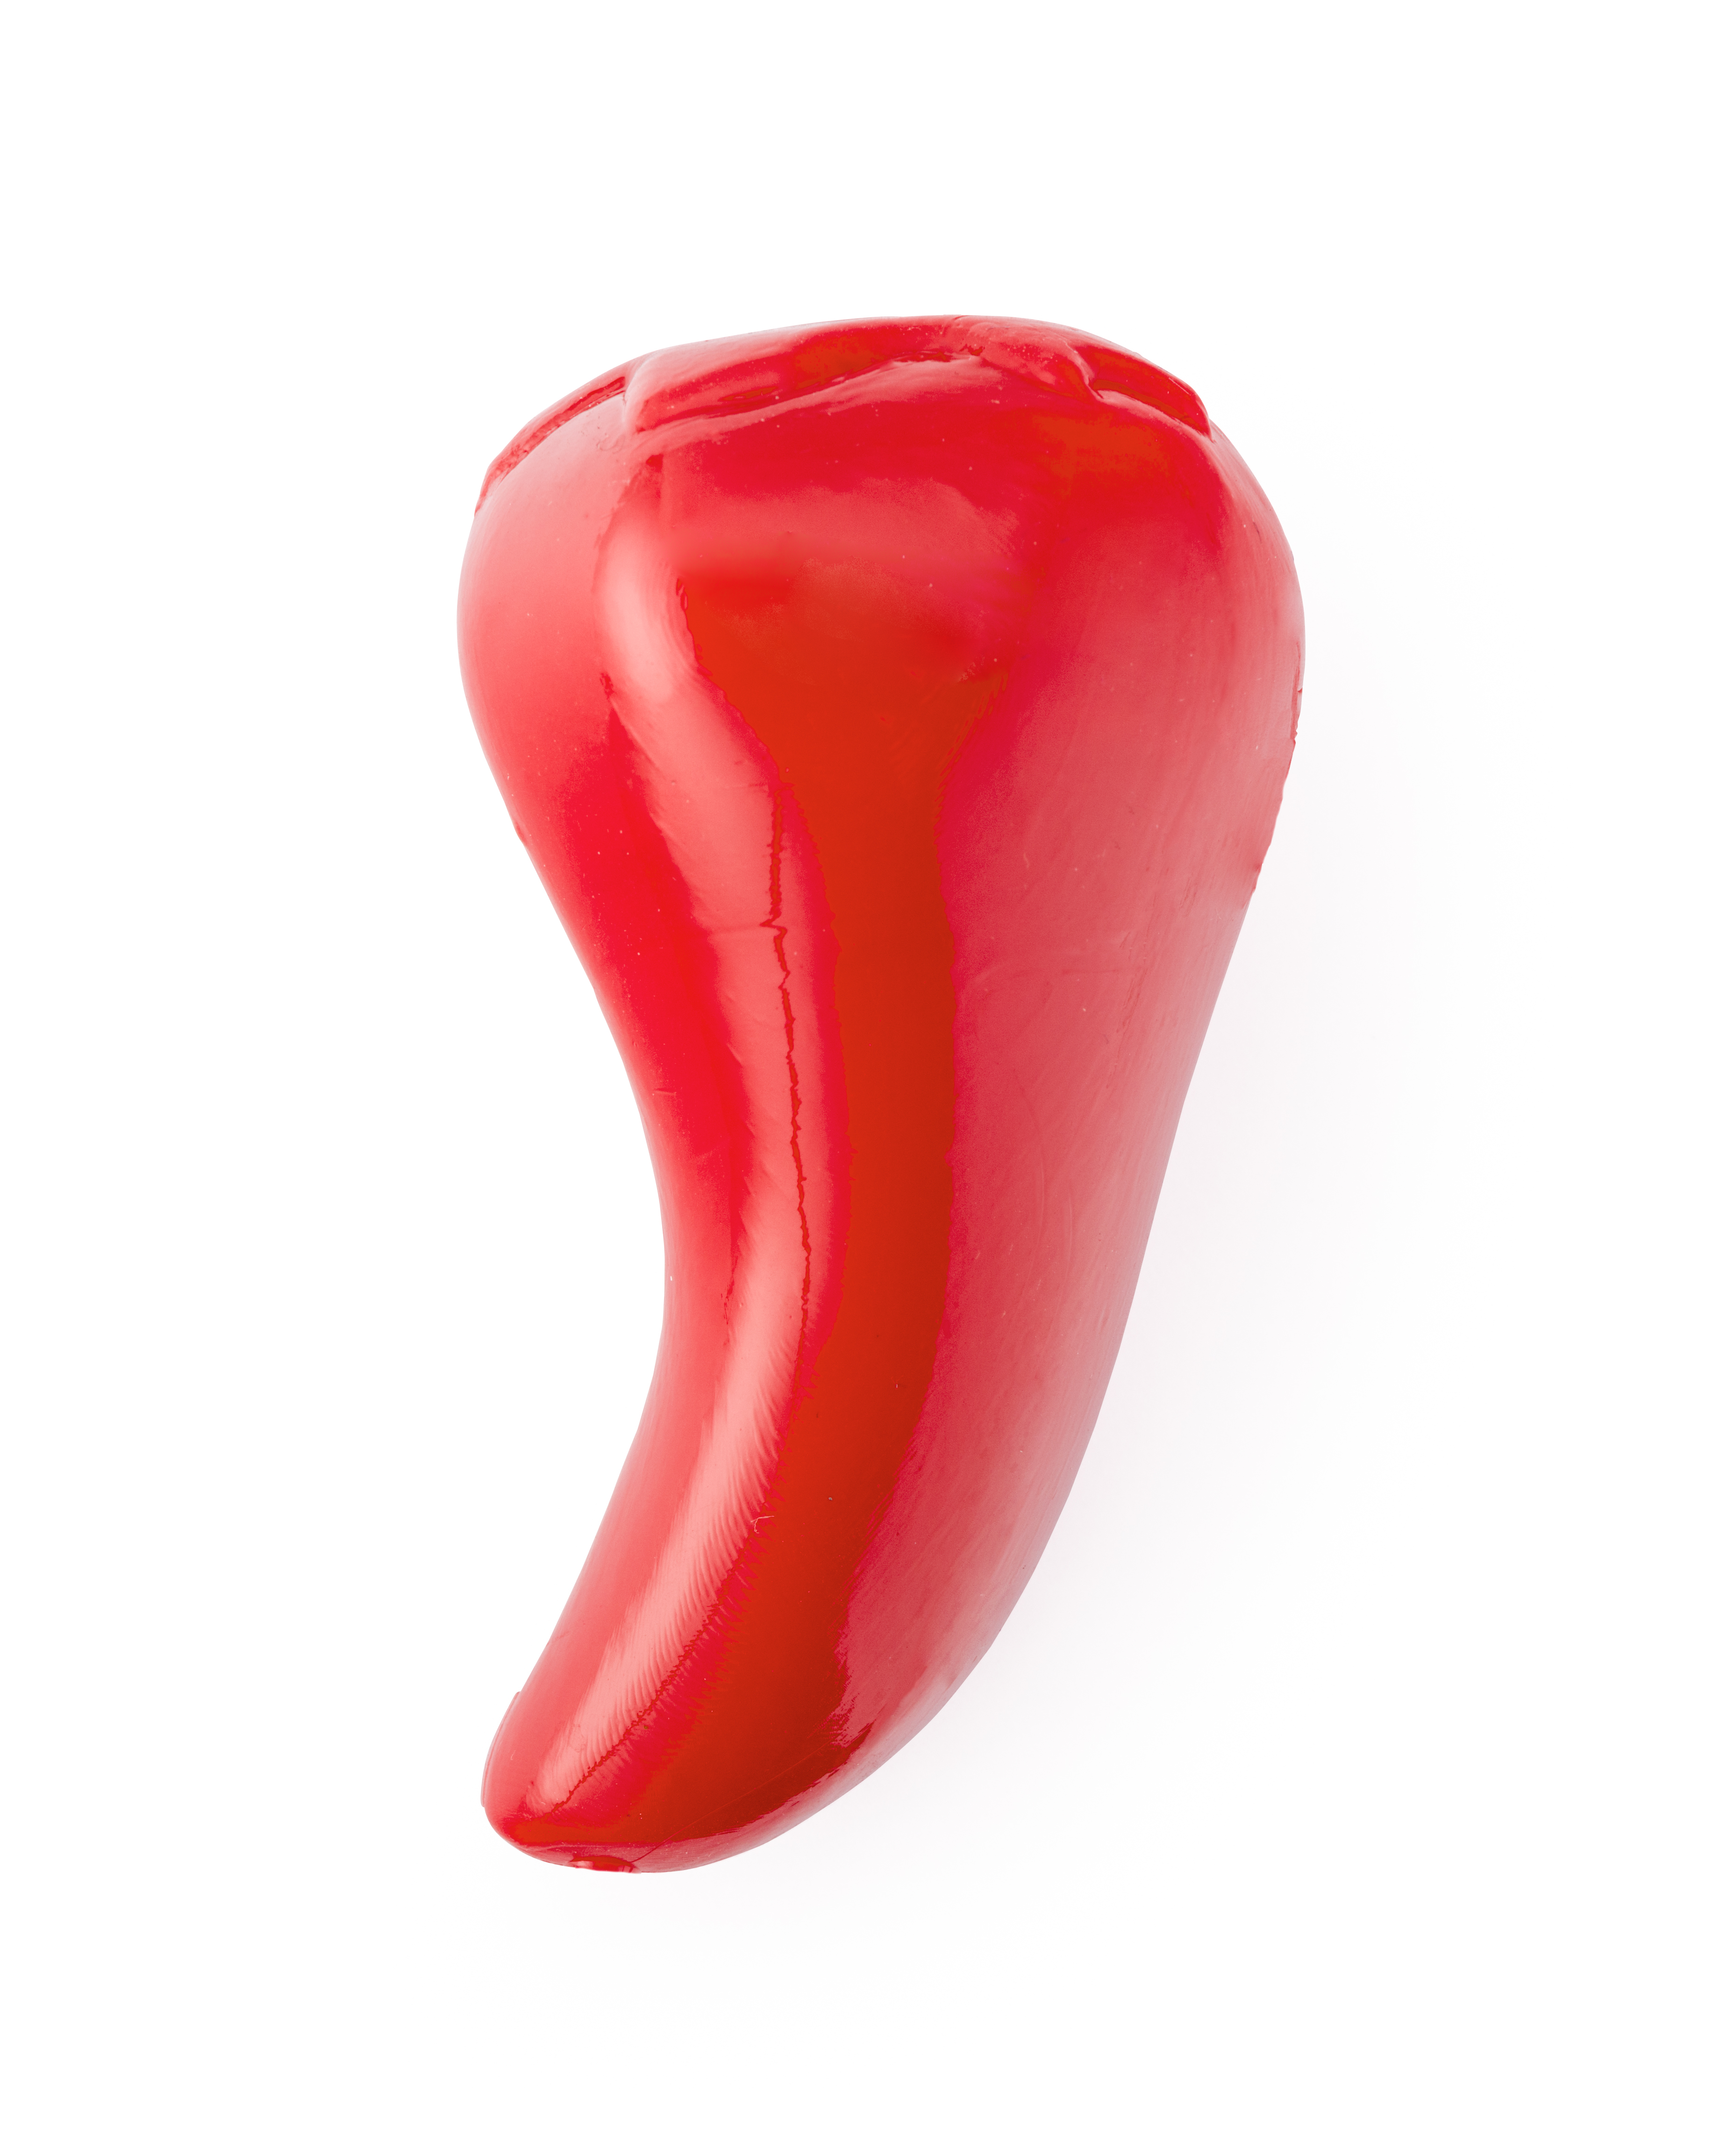 Planet Dog Orbee Tuff Durable Chili Pepper Dog Toy - image 1 of 1